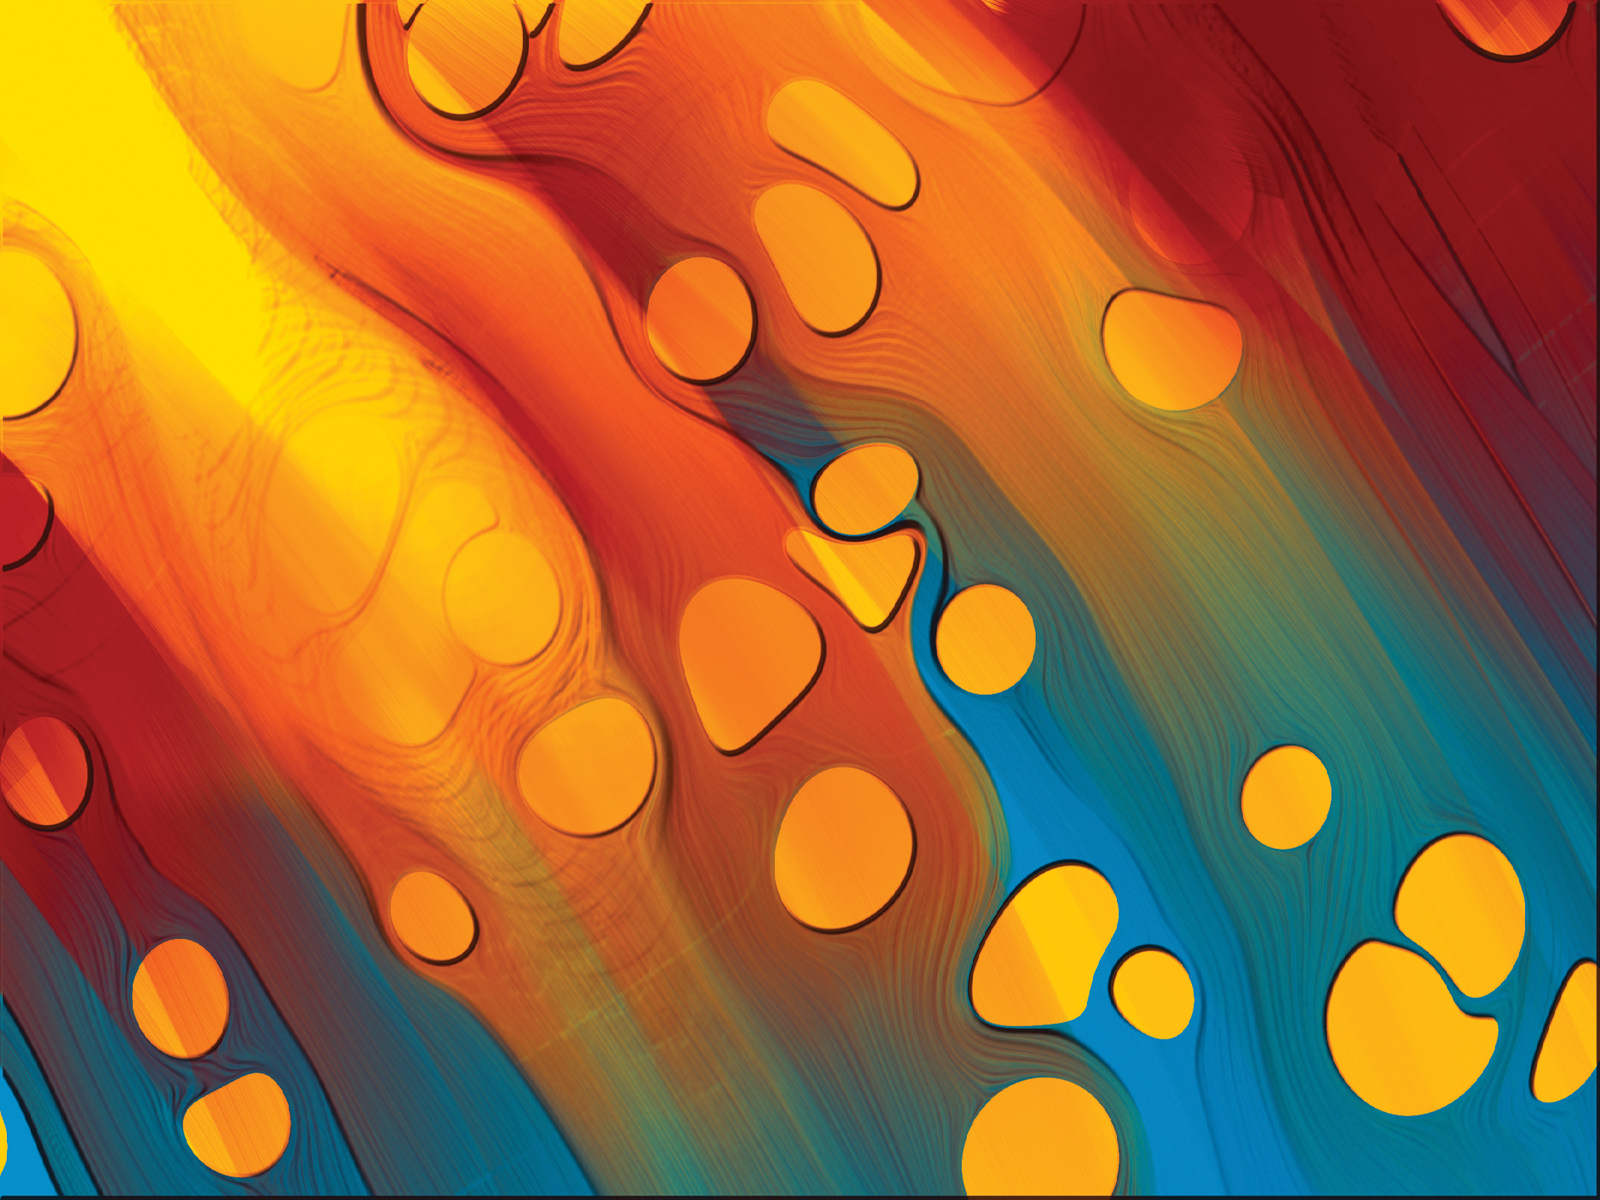 Rainbow surface abstract Backgrounds - Abstract, Games, Movie & TV